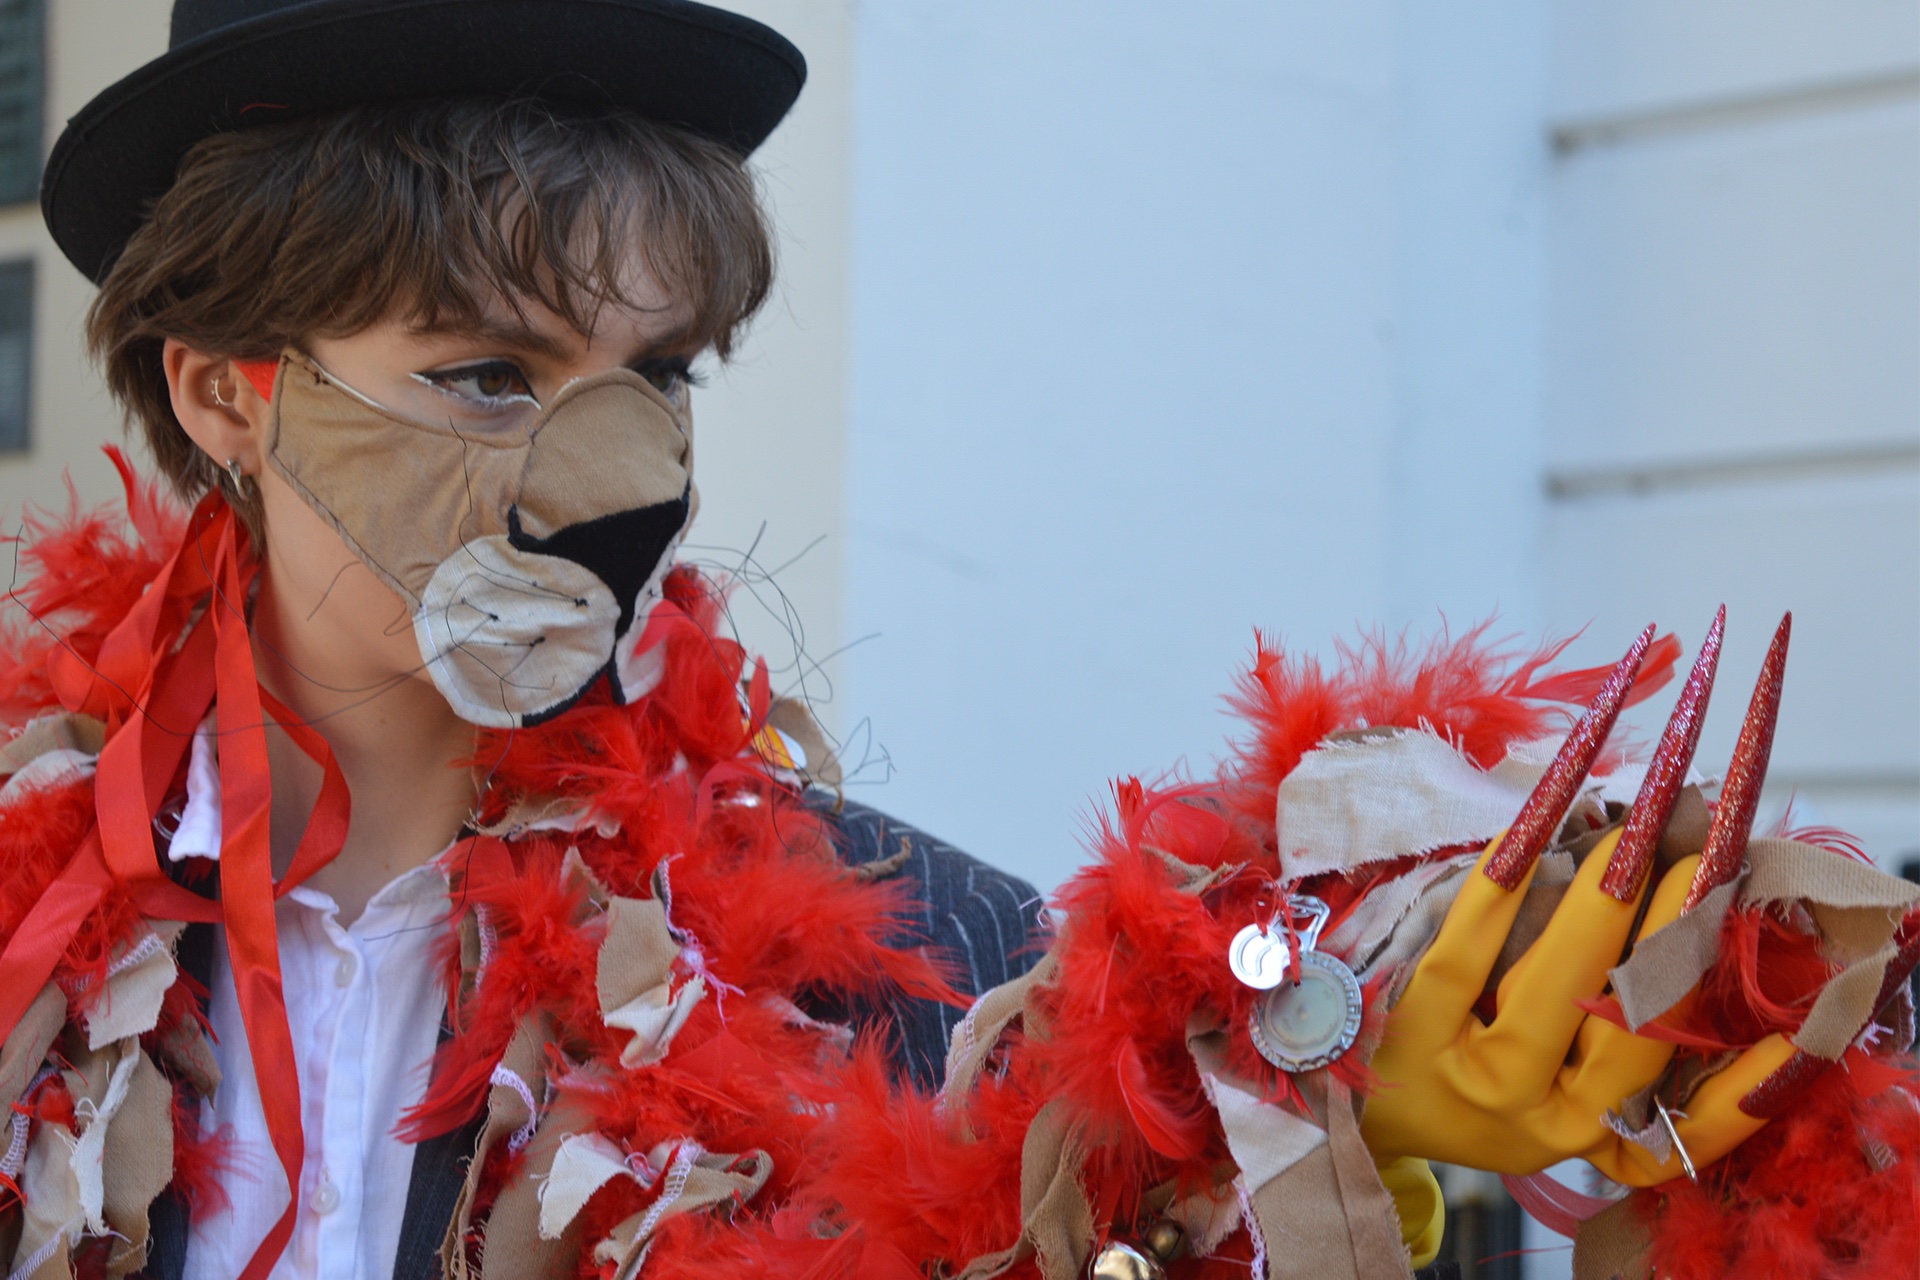 A person with short hair is wearing a lion mask constructed from fabric with wiry whiskers, a bowler hat, a red feather boa embellished with tan fabric and bottle tops, and rubber gloves with long, sparkly, red nails.